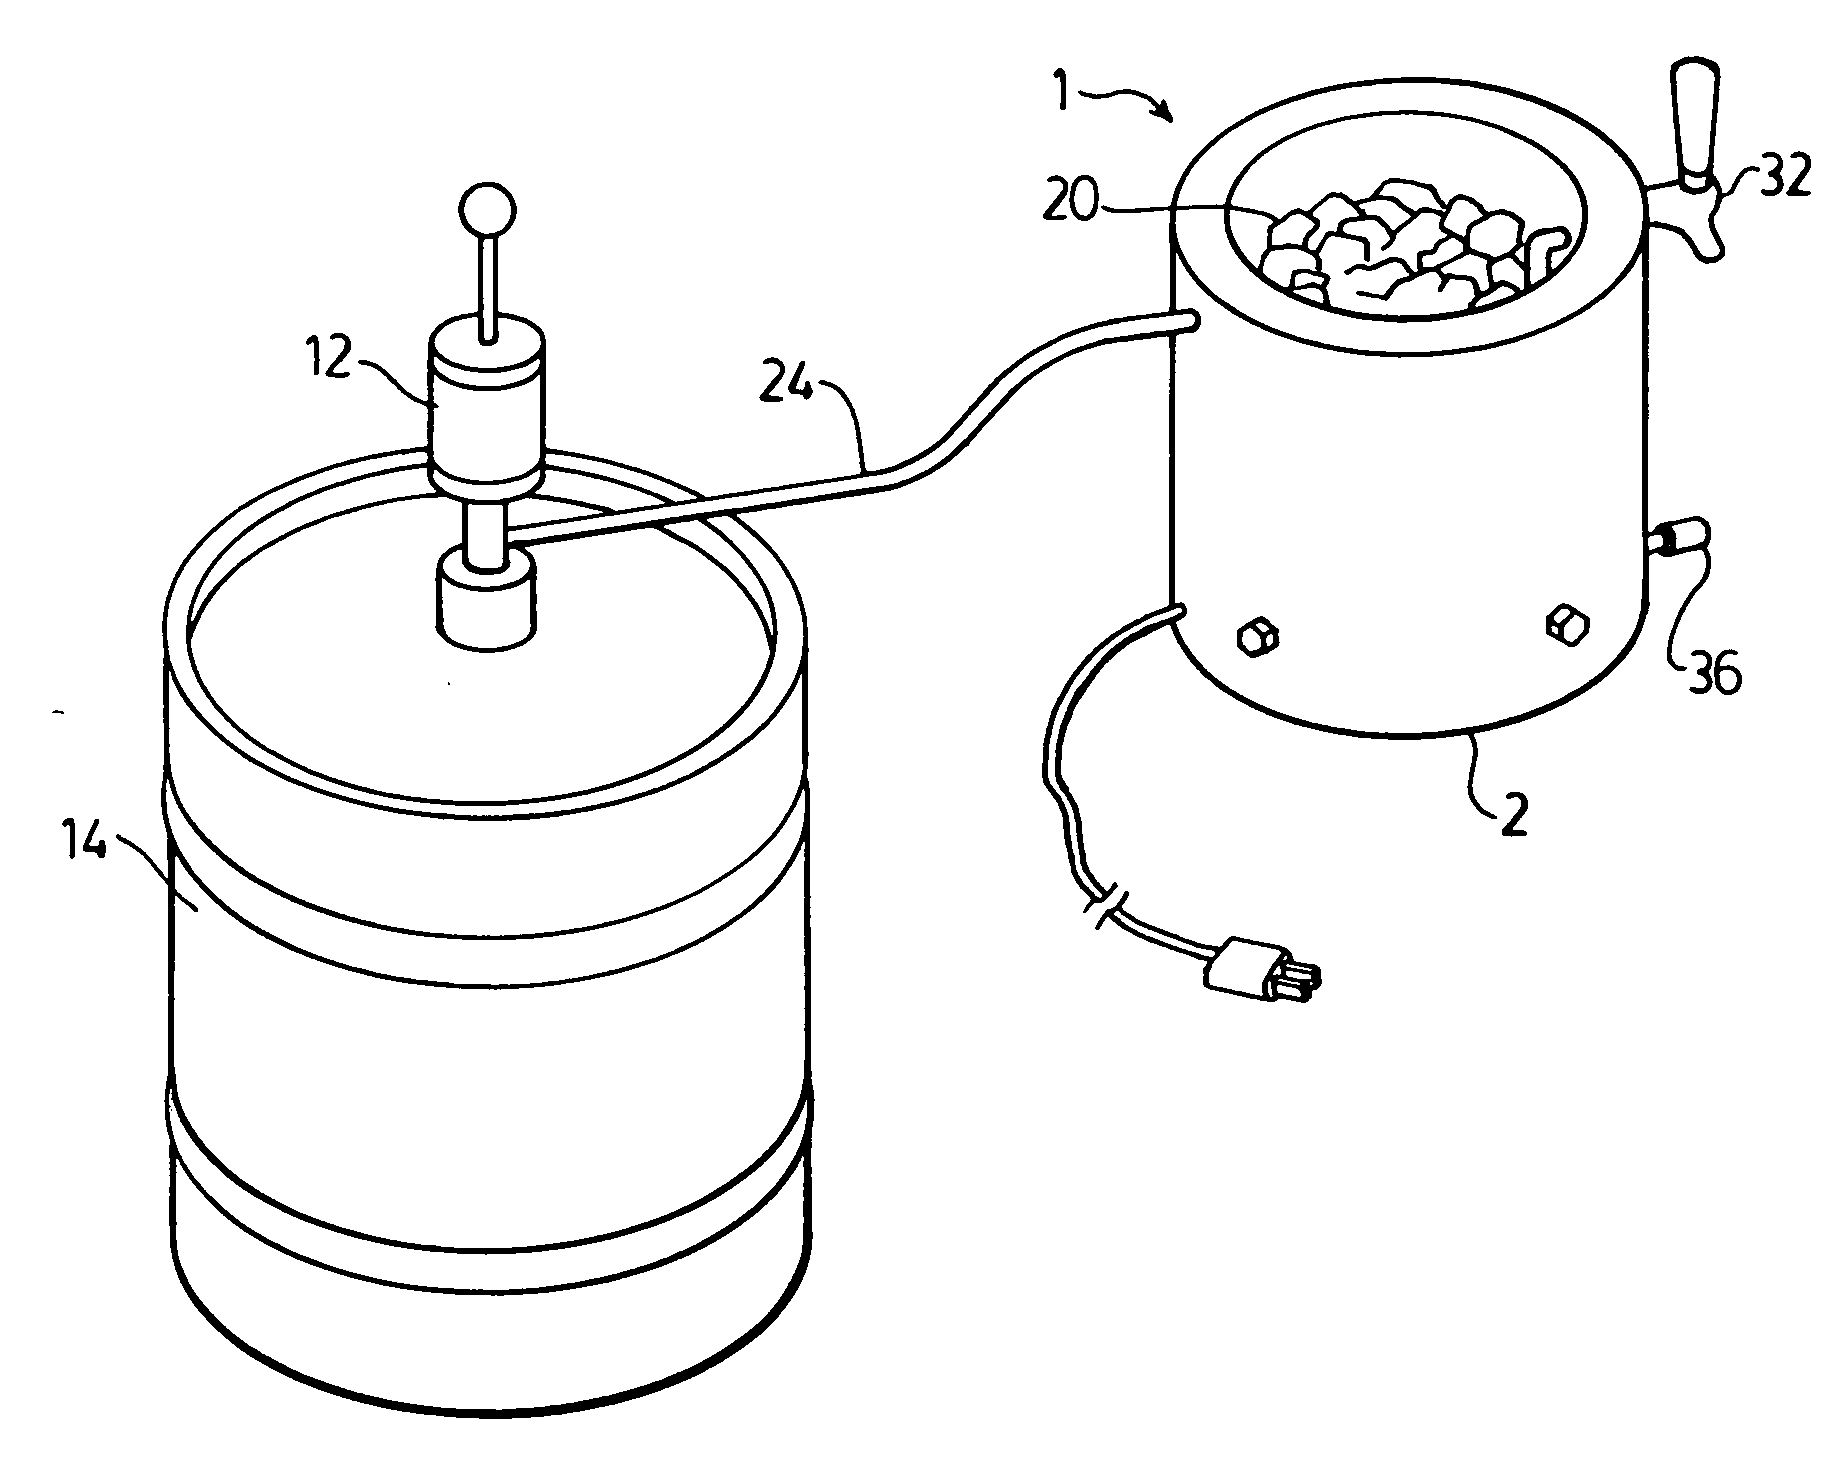 Portable apparatus for chilling draught beverages